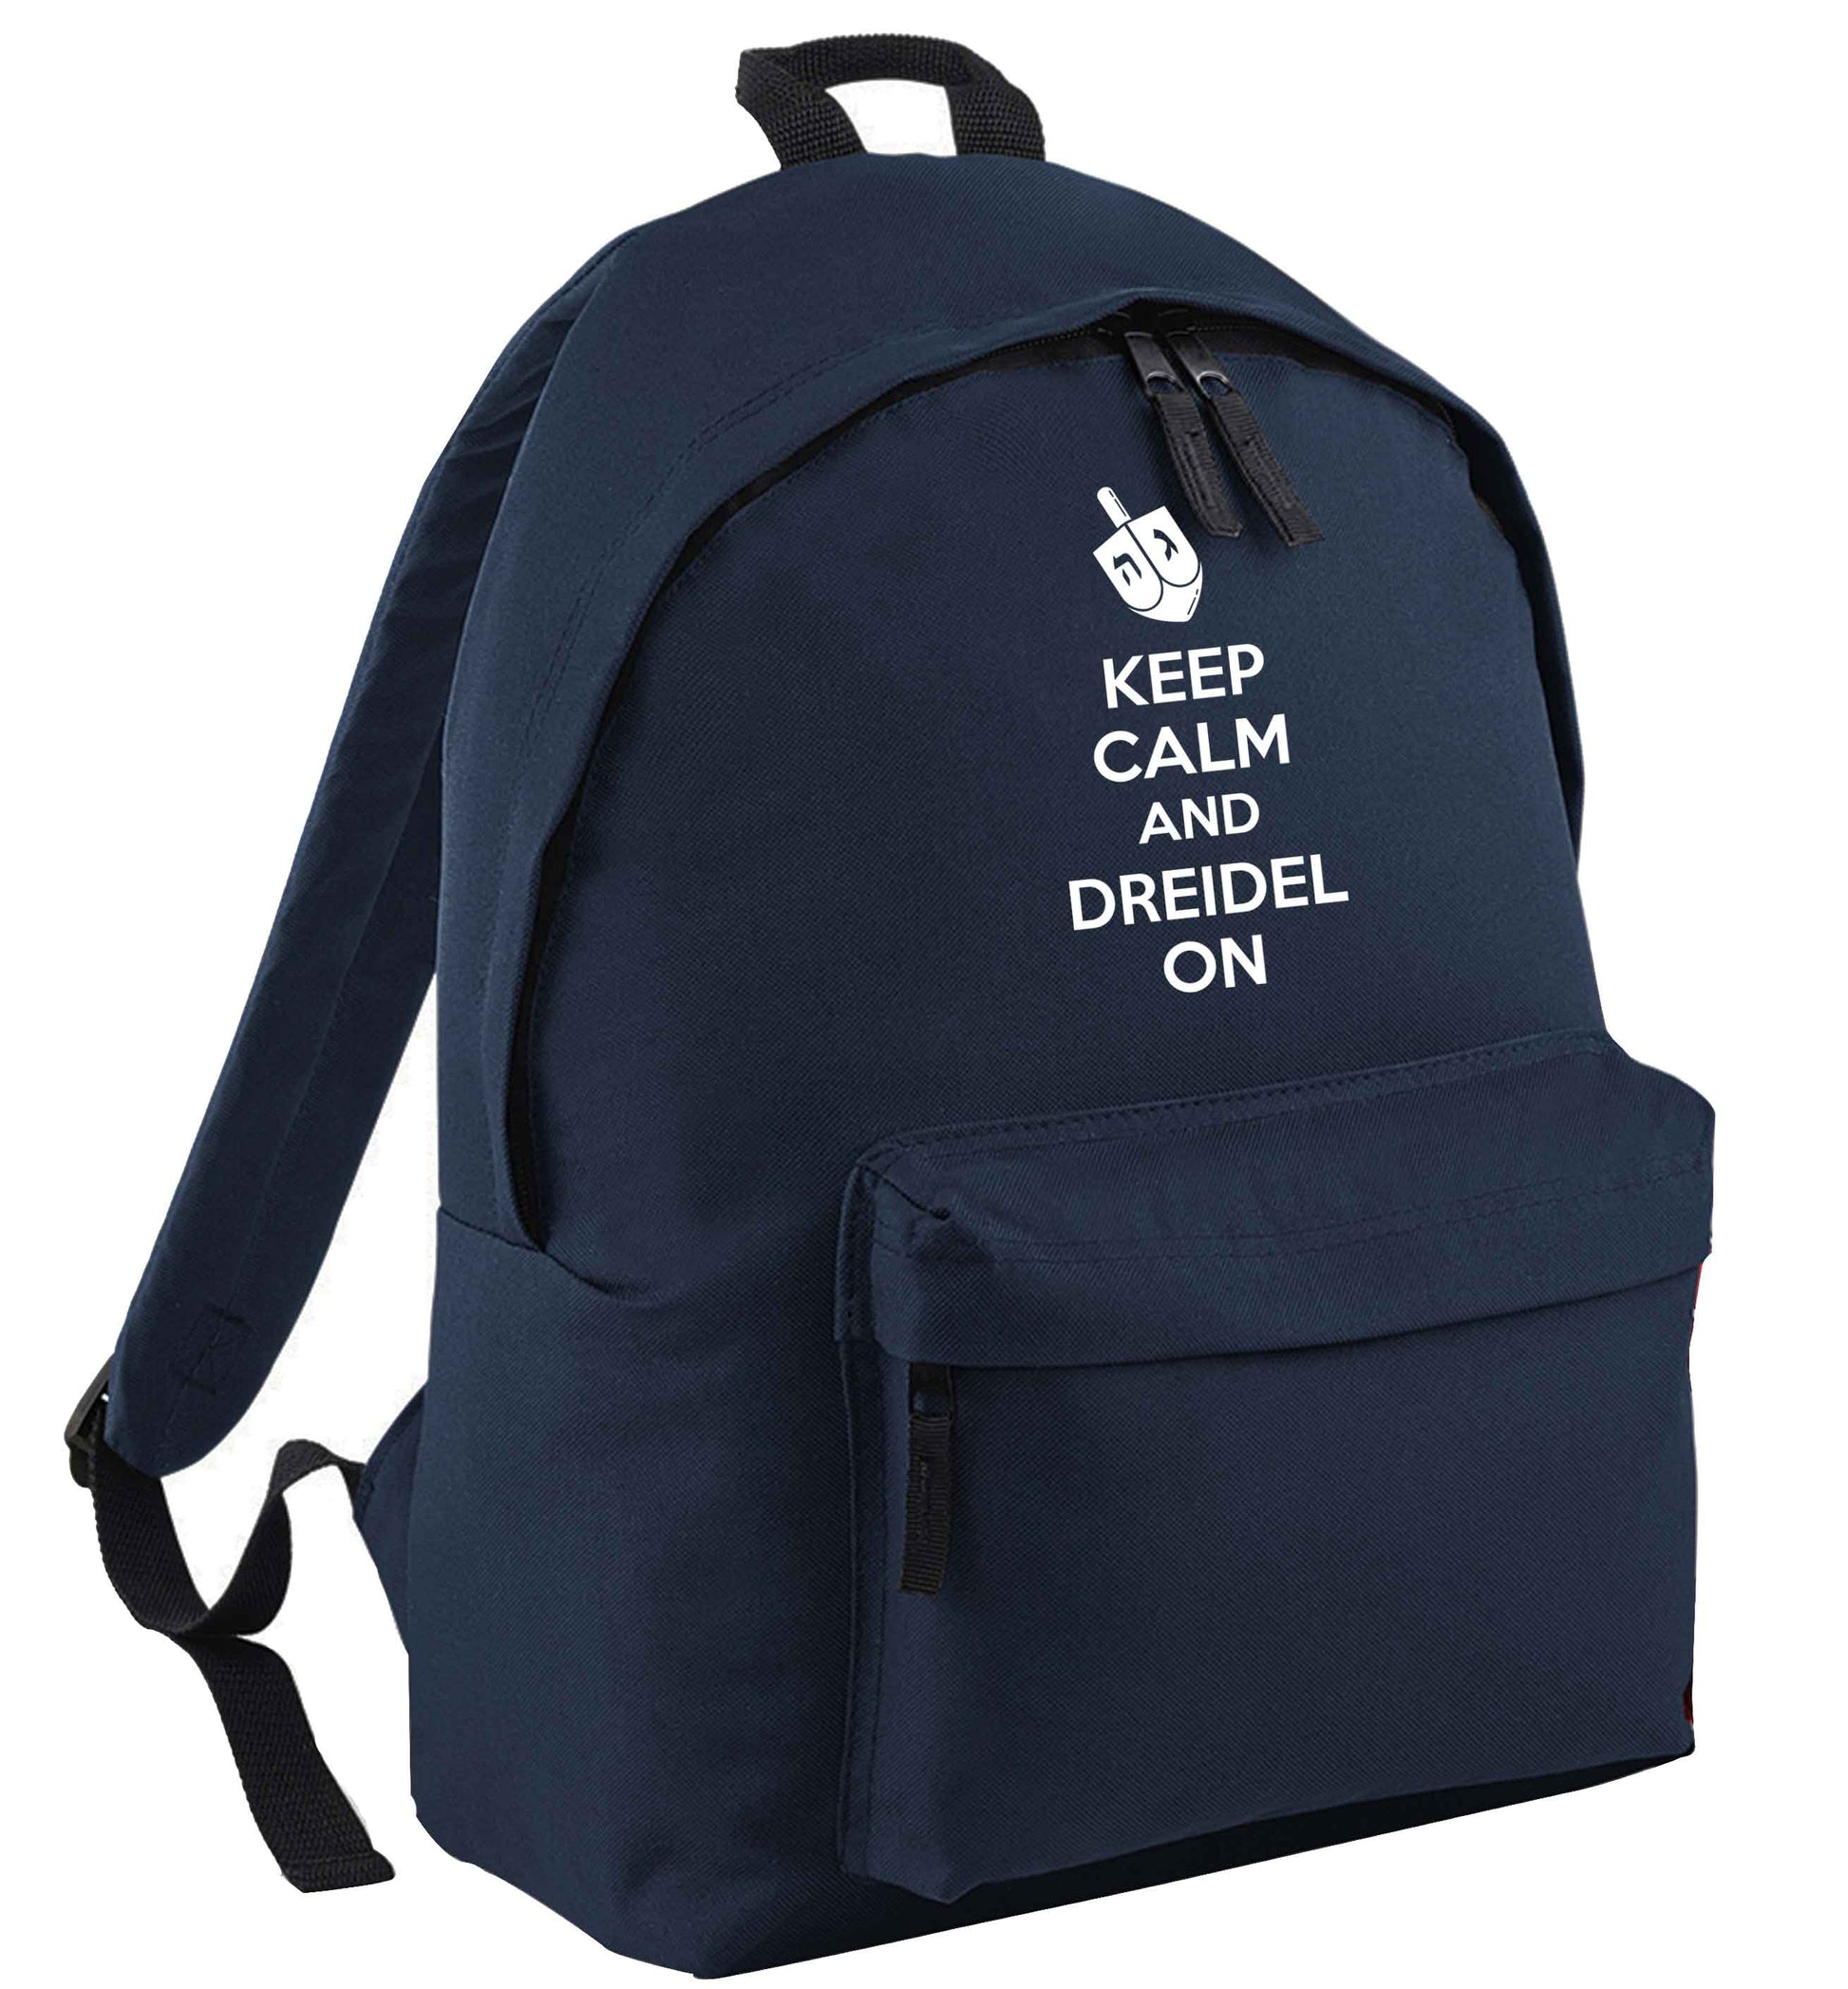 Keep calm and dreidel on navy adults backpack